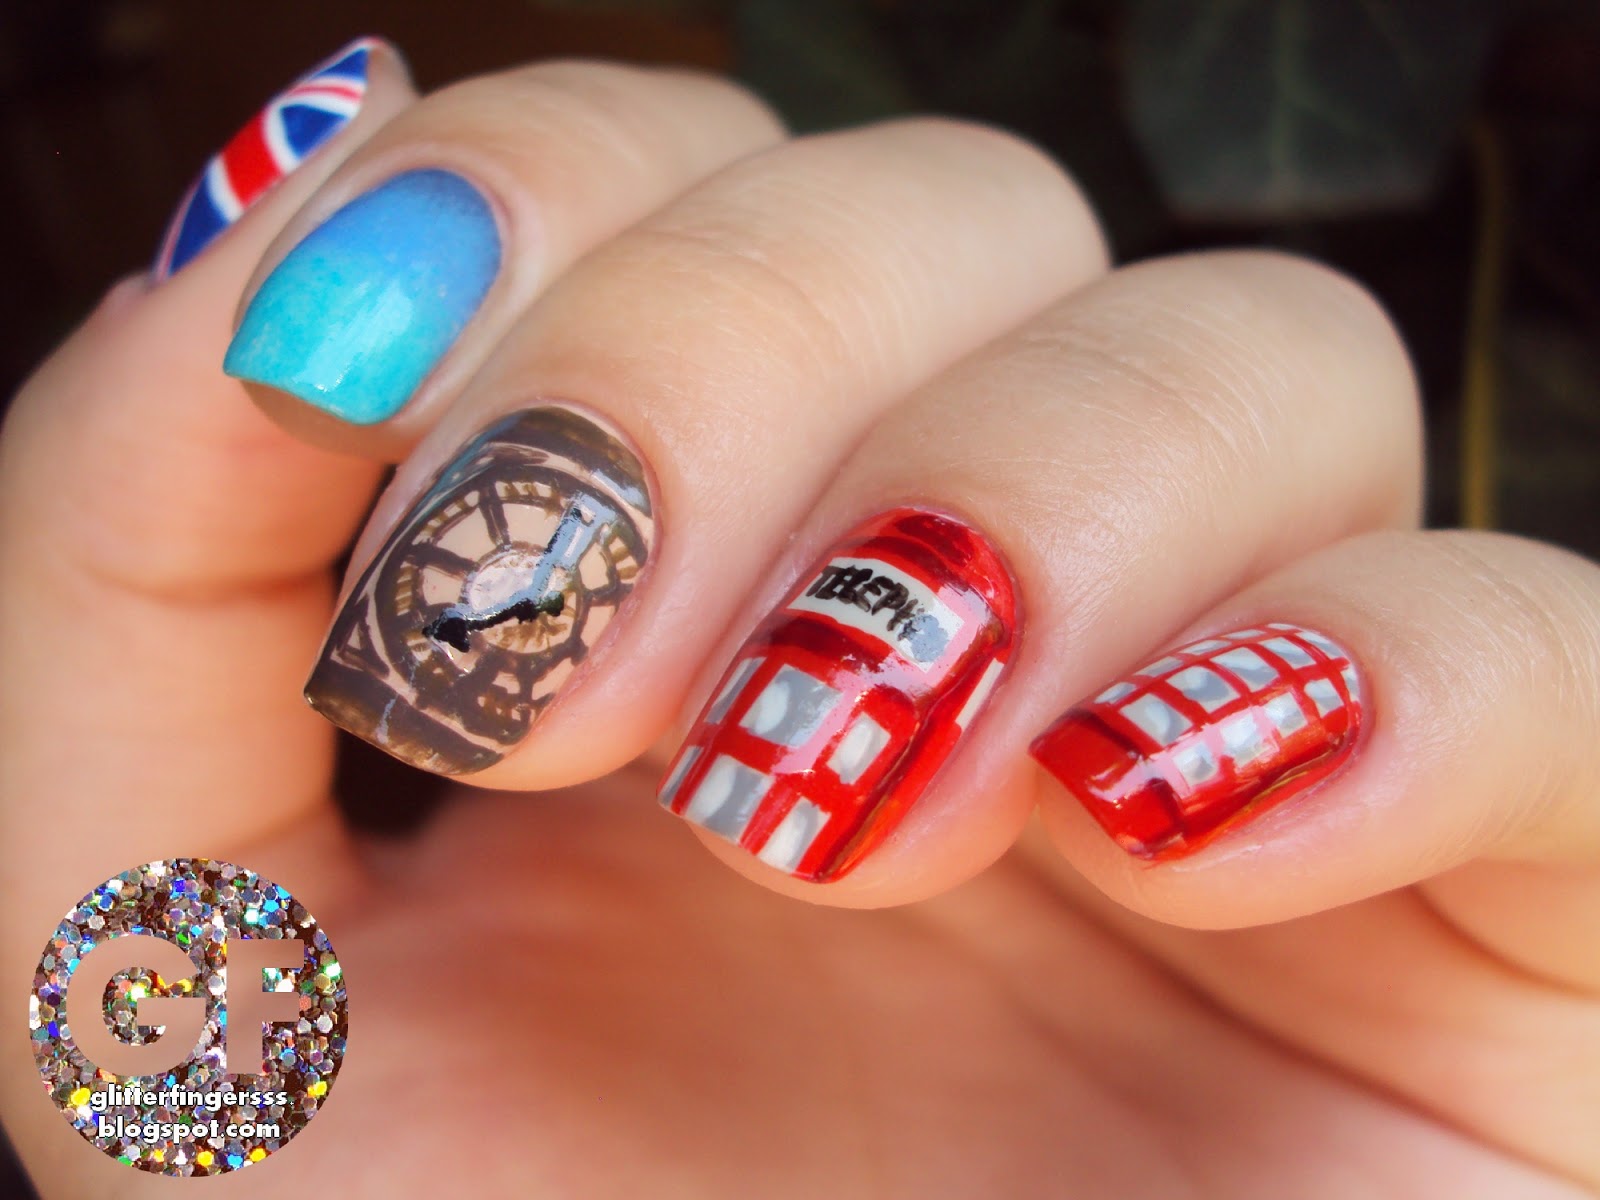 4. Nail Art by London - wide 1